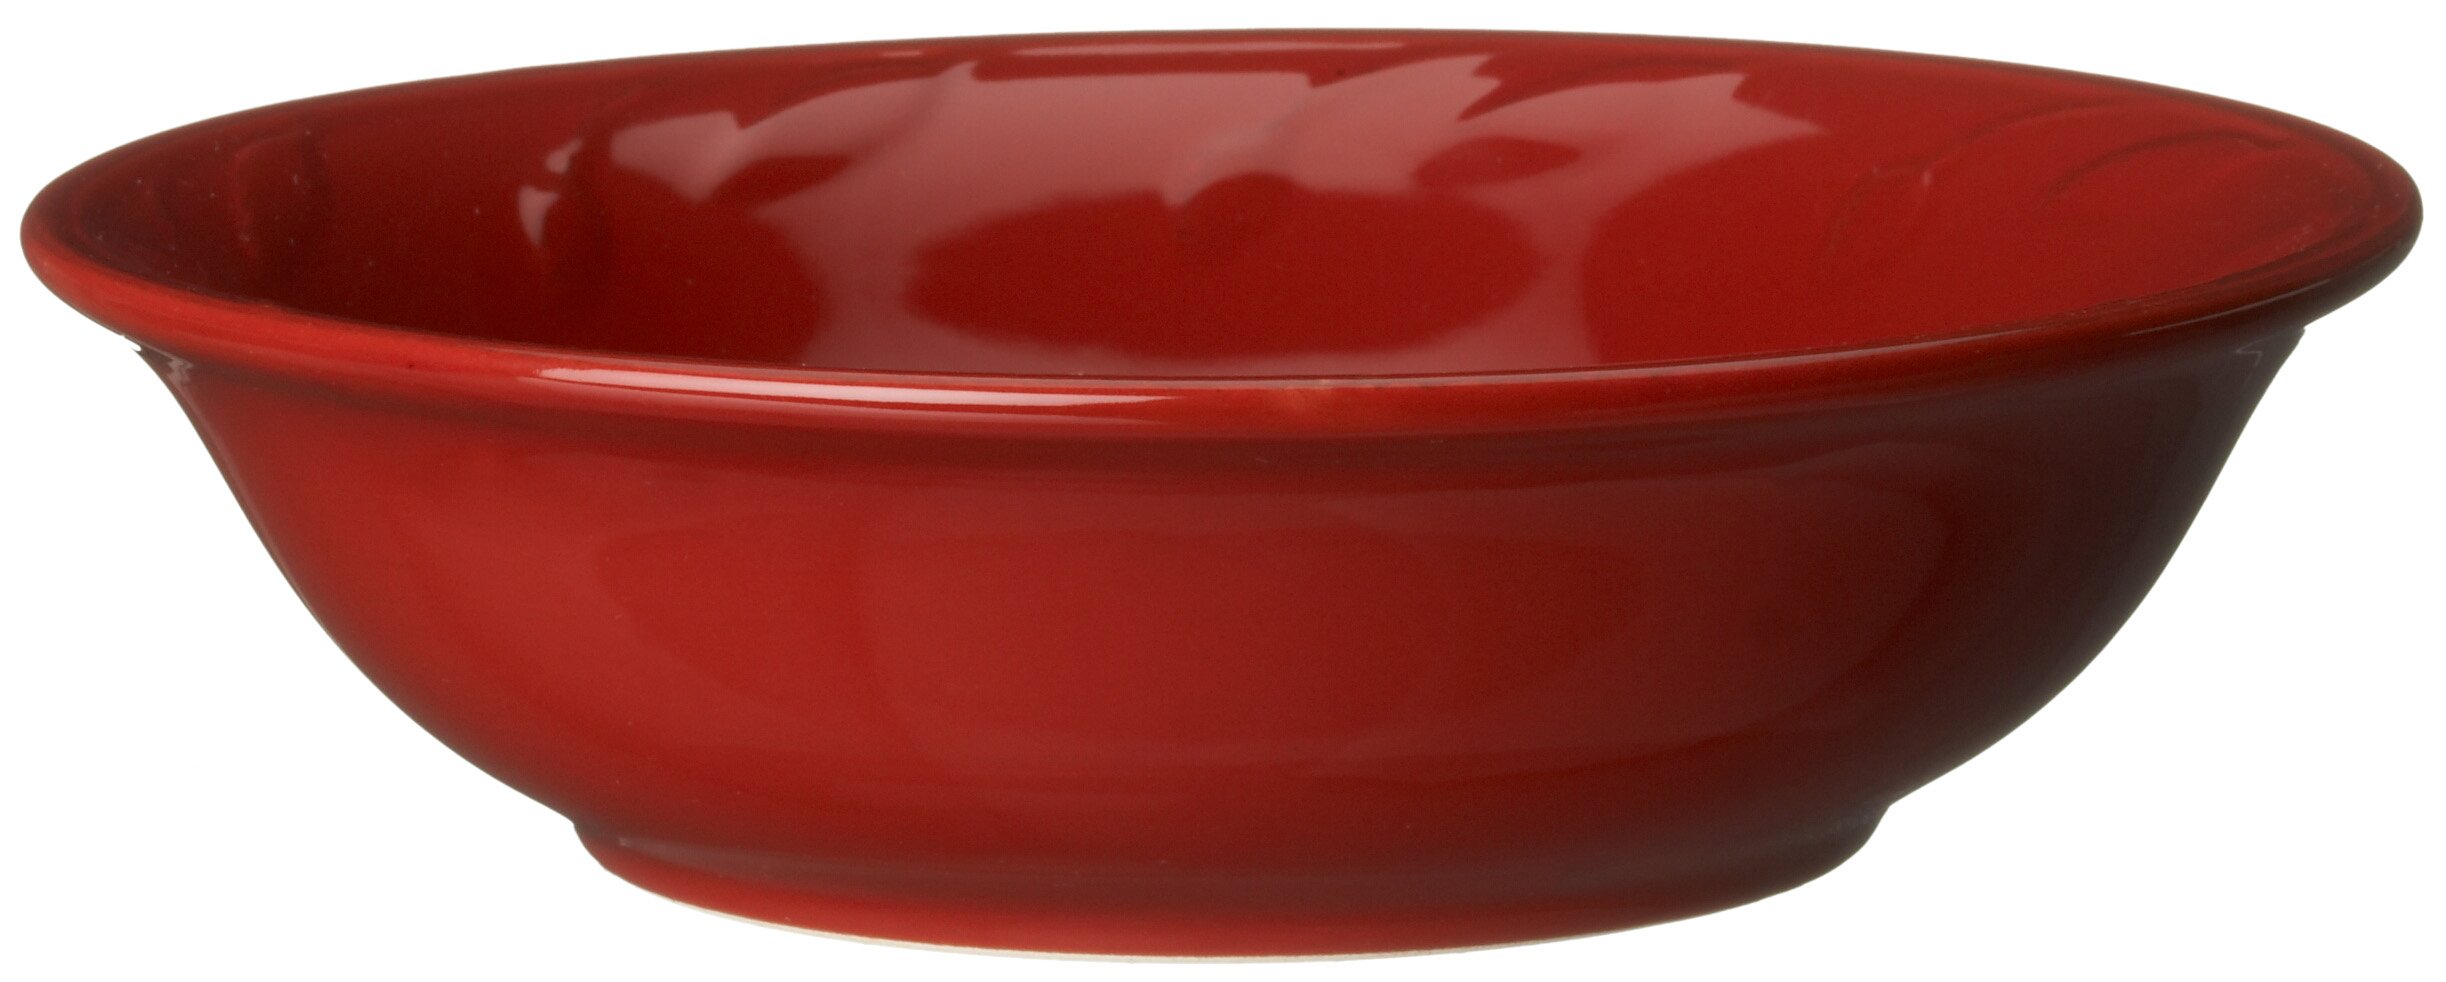 Signature Housewares Sorrento Collection 16-Ounce Cereal Bowl, Ruby Antiqued Finish